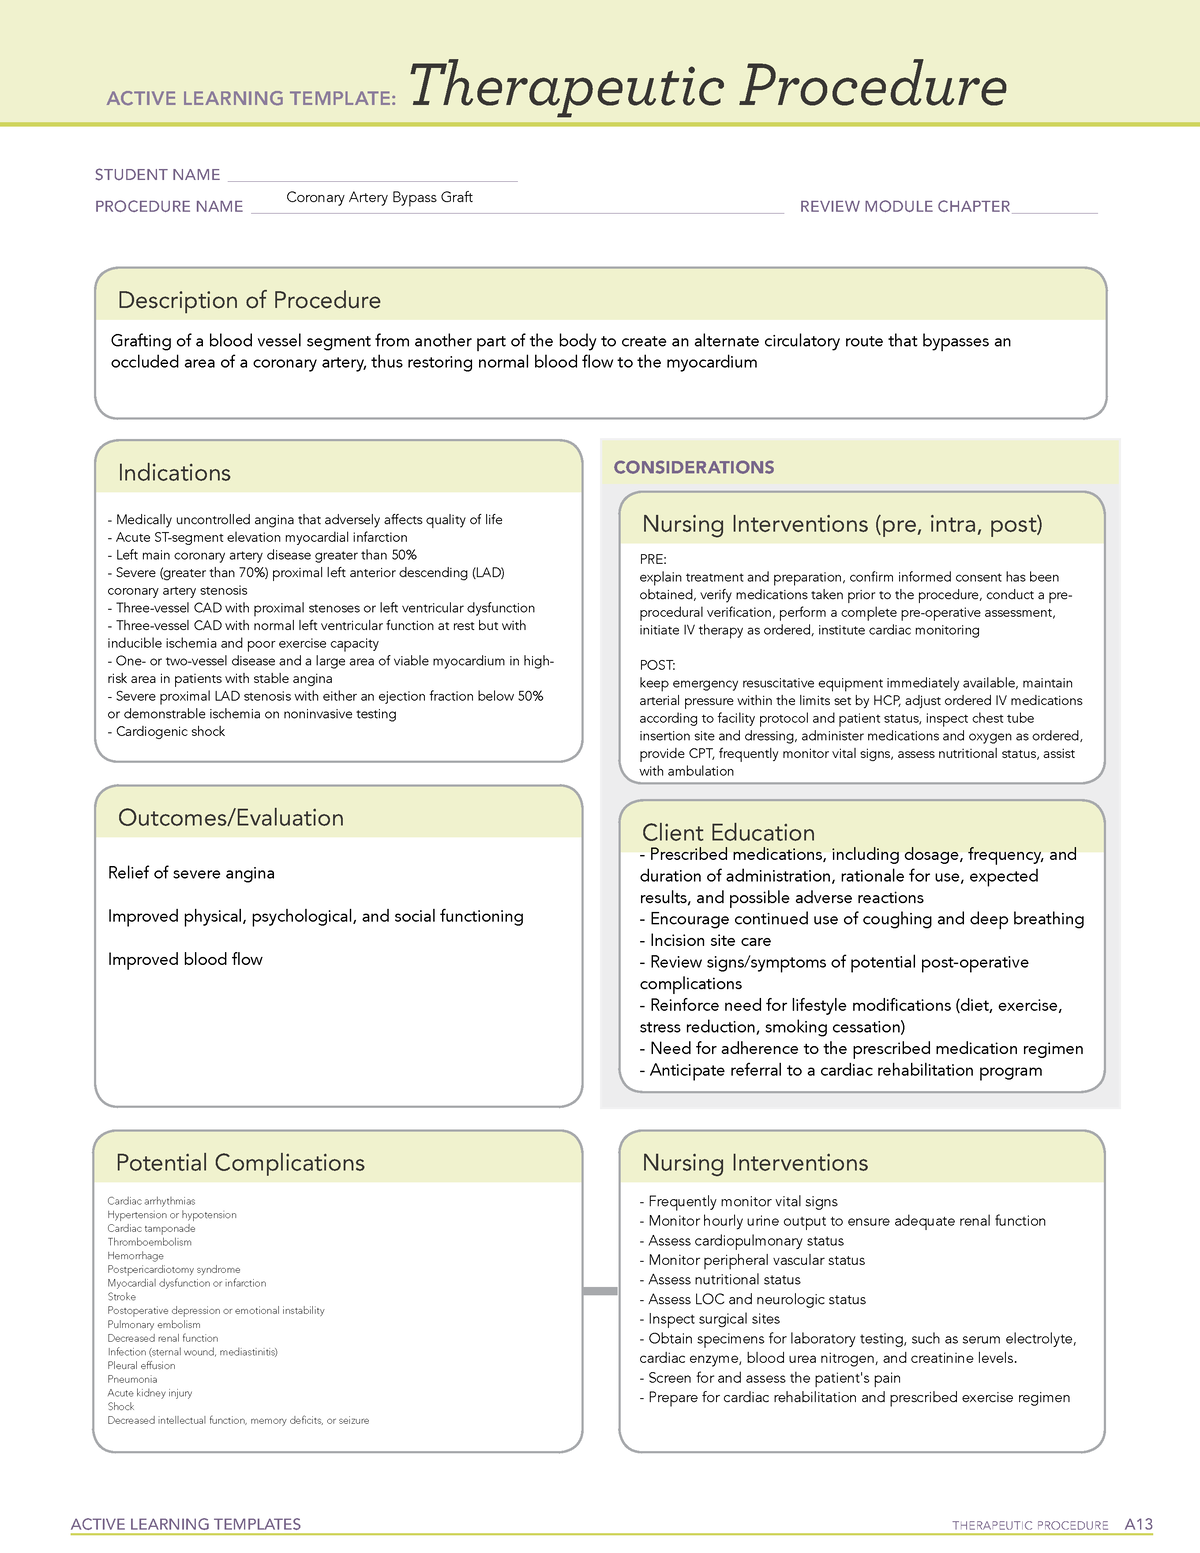 Active Learning Template Therapeutic Procedure Form ACTIVE LEARNING 